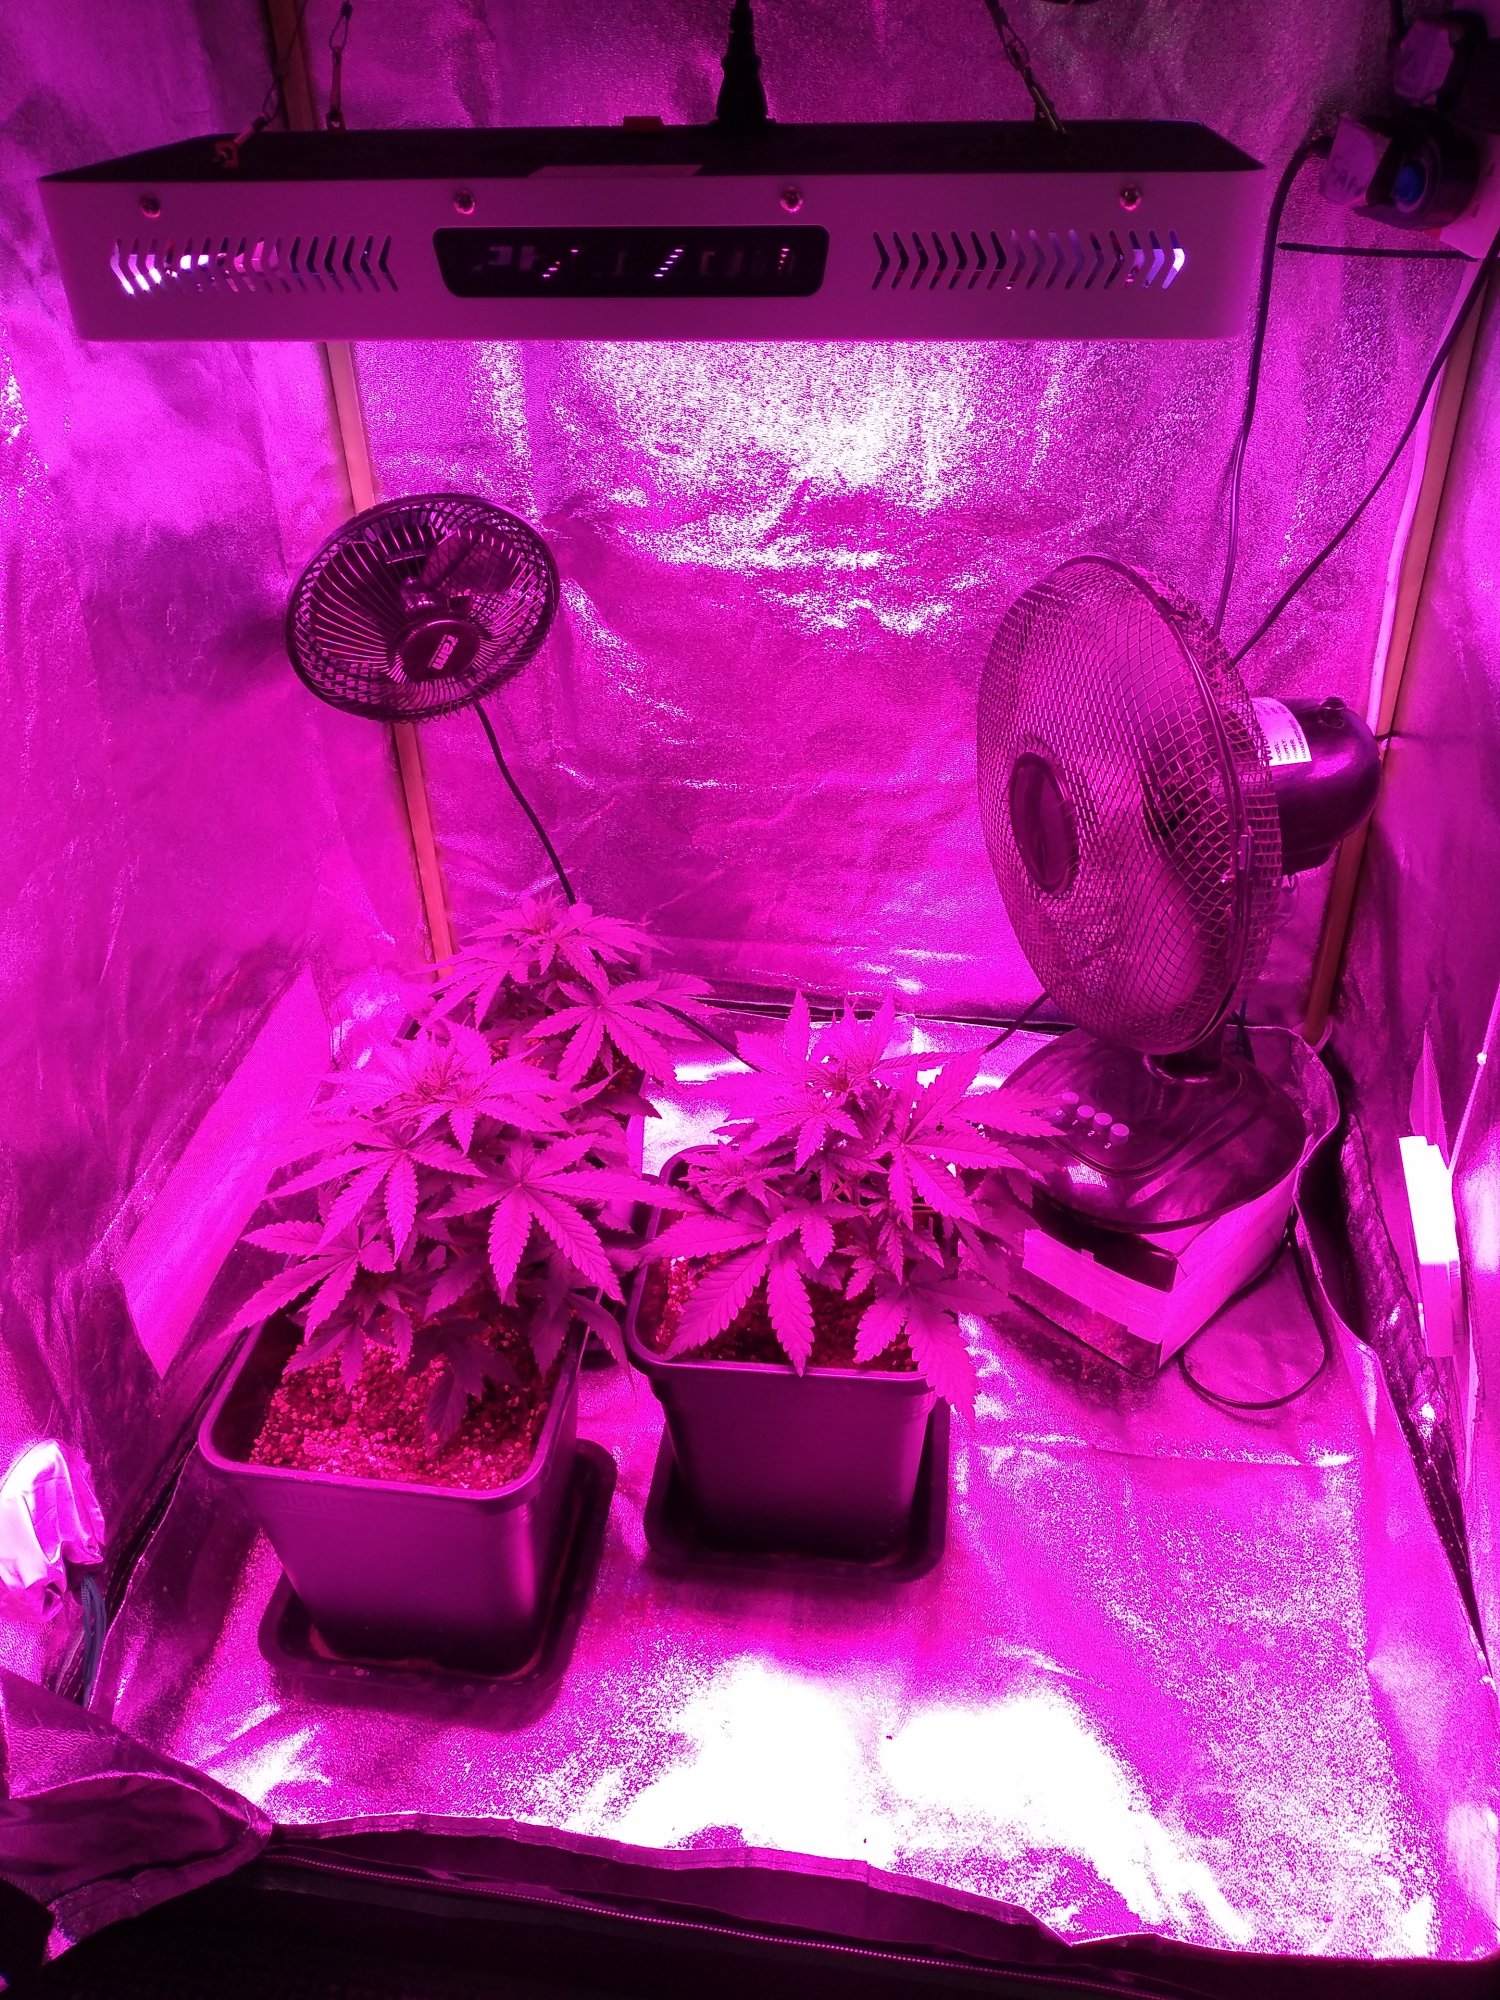 New grower   mistakes have been made